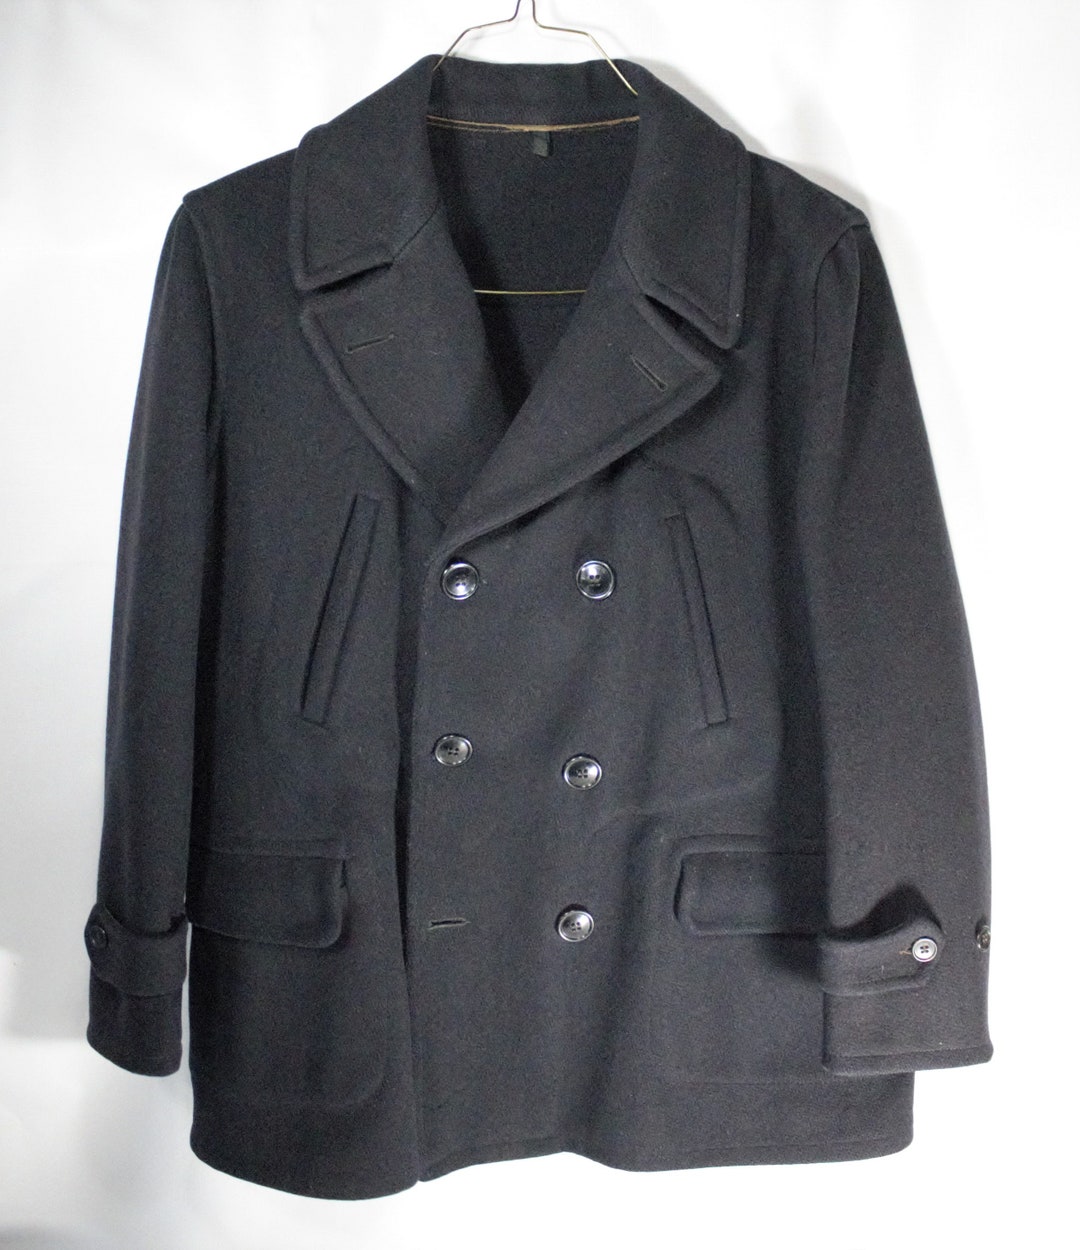 Vintage 1940's Heavy Wool Coat Peacoat Railroad Style Black Thick ...